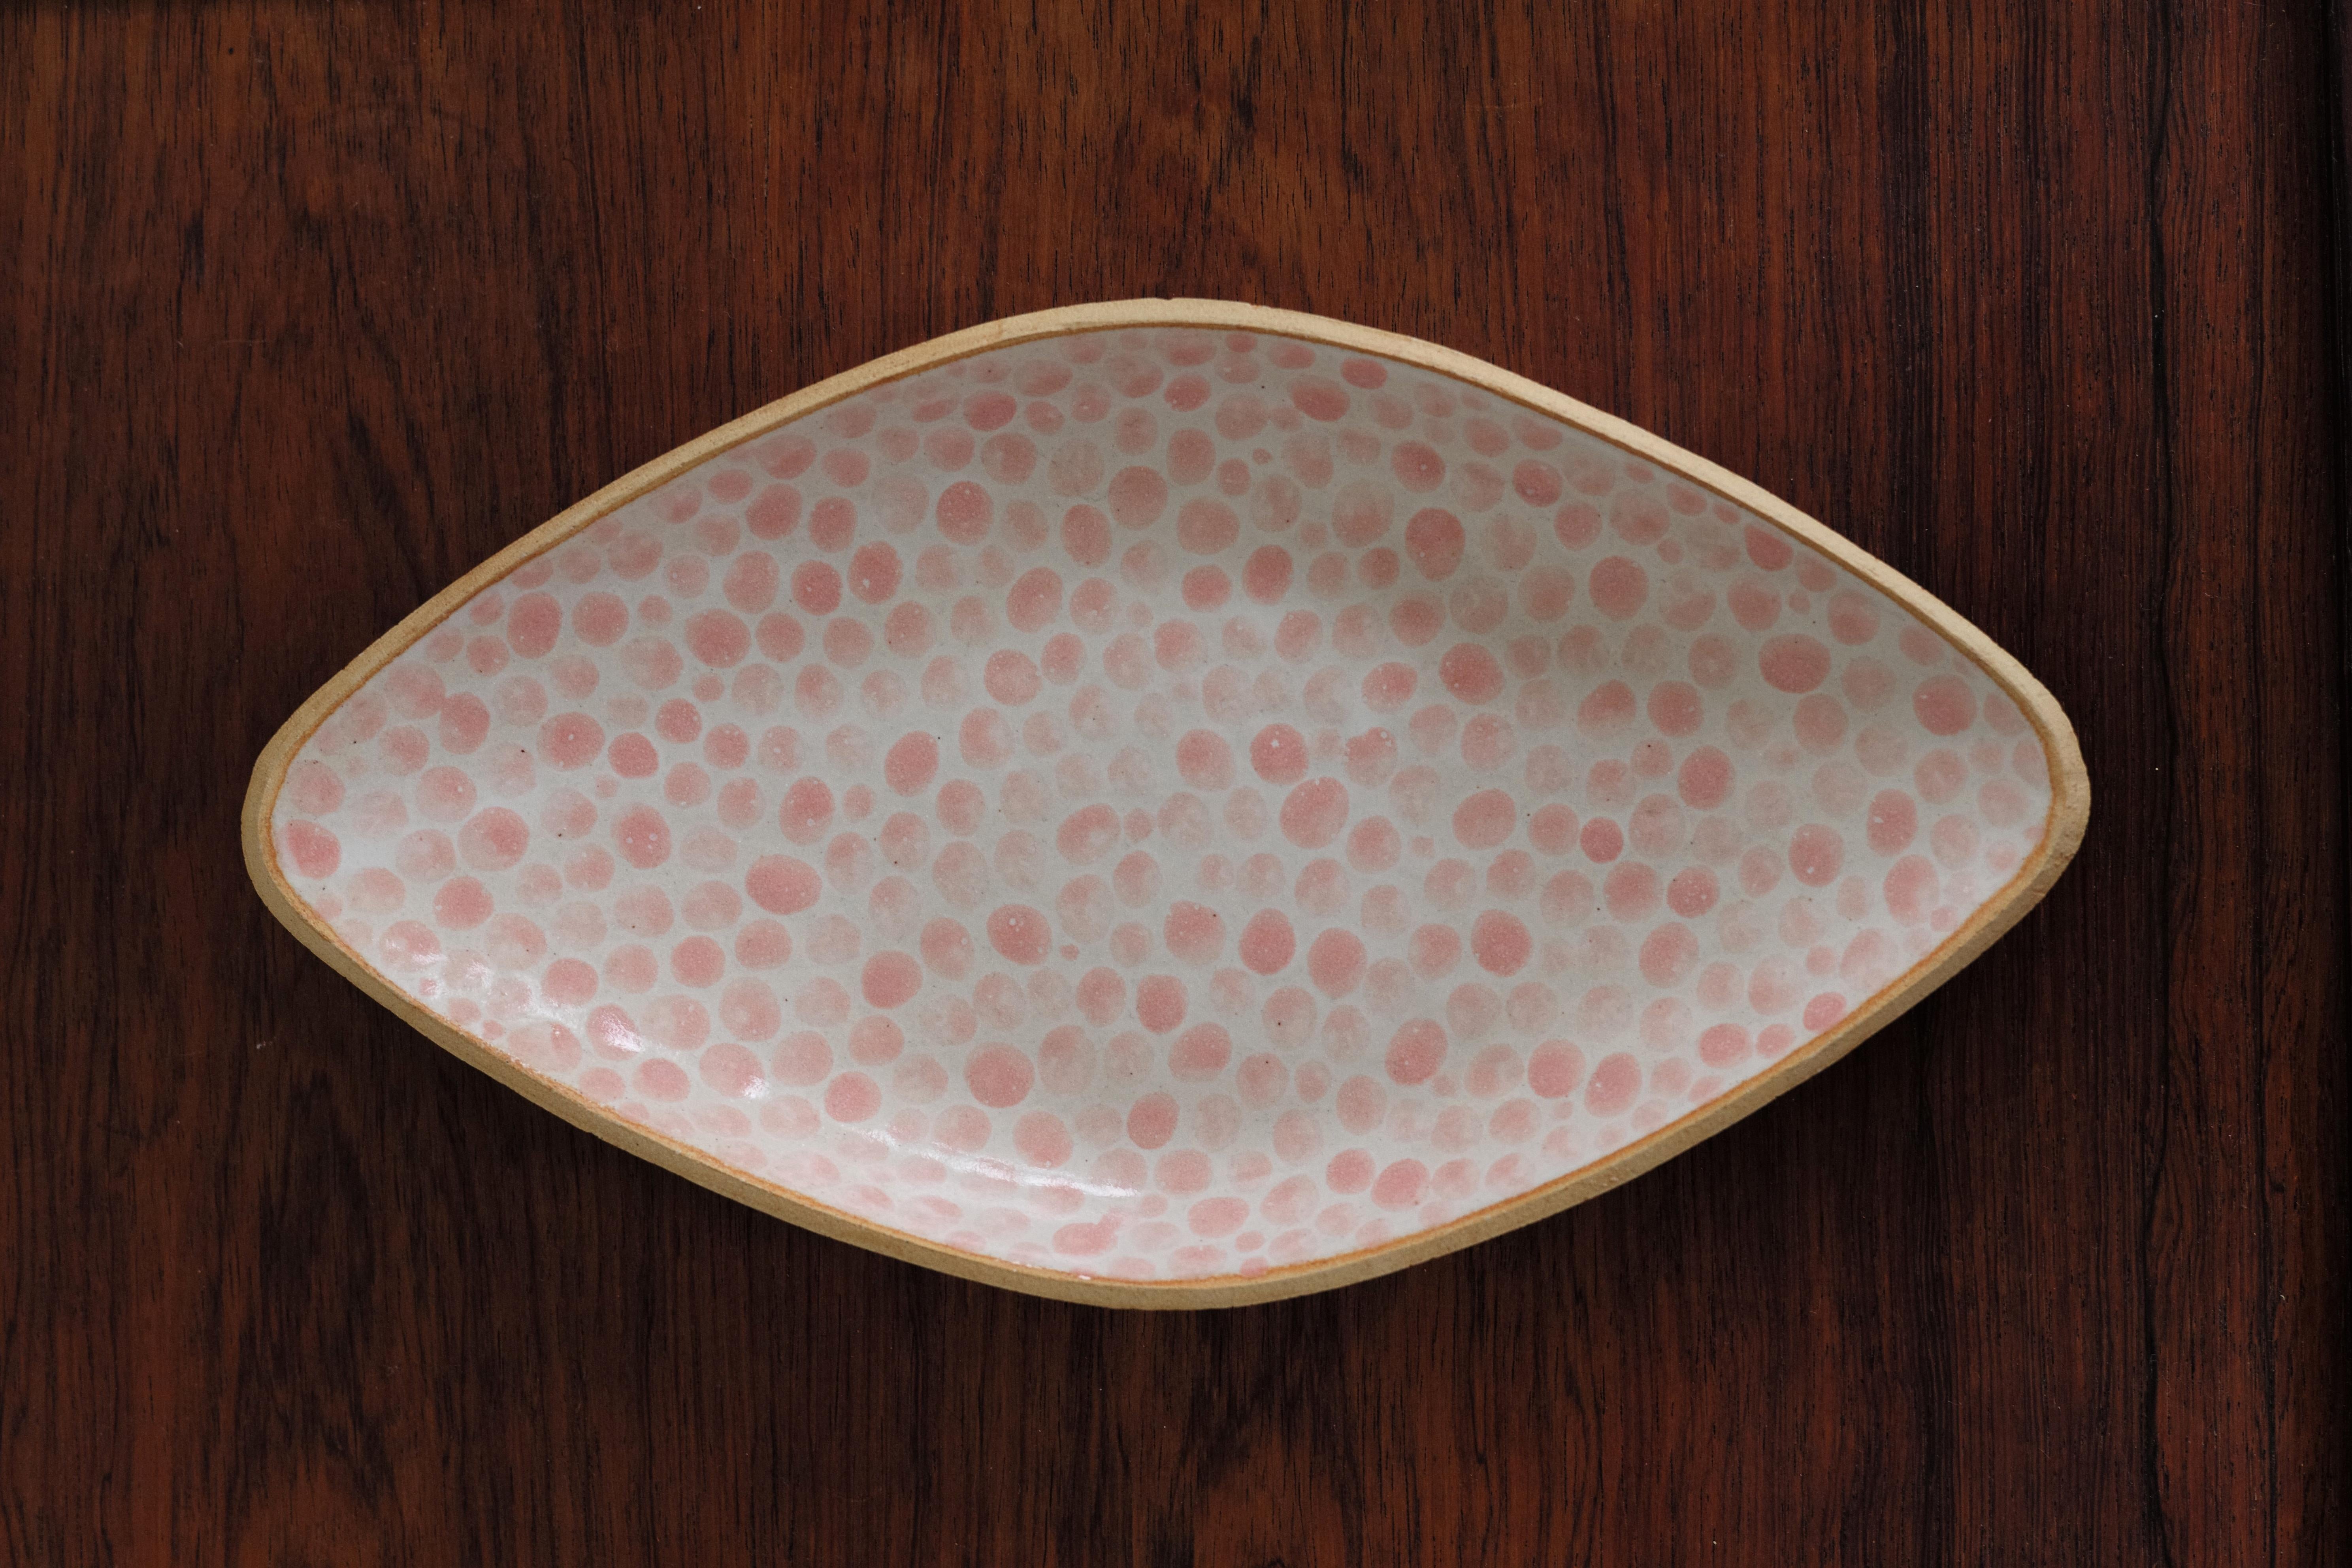 Handmade dish with elegant lifted corners. Made in 2019. Electric fired ceramic with hand painted glaze. Unique piece.